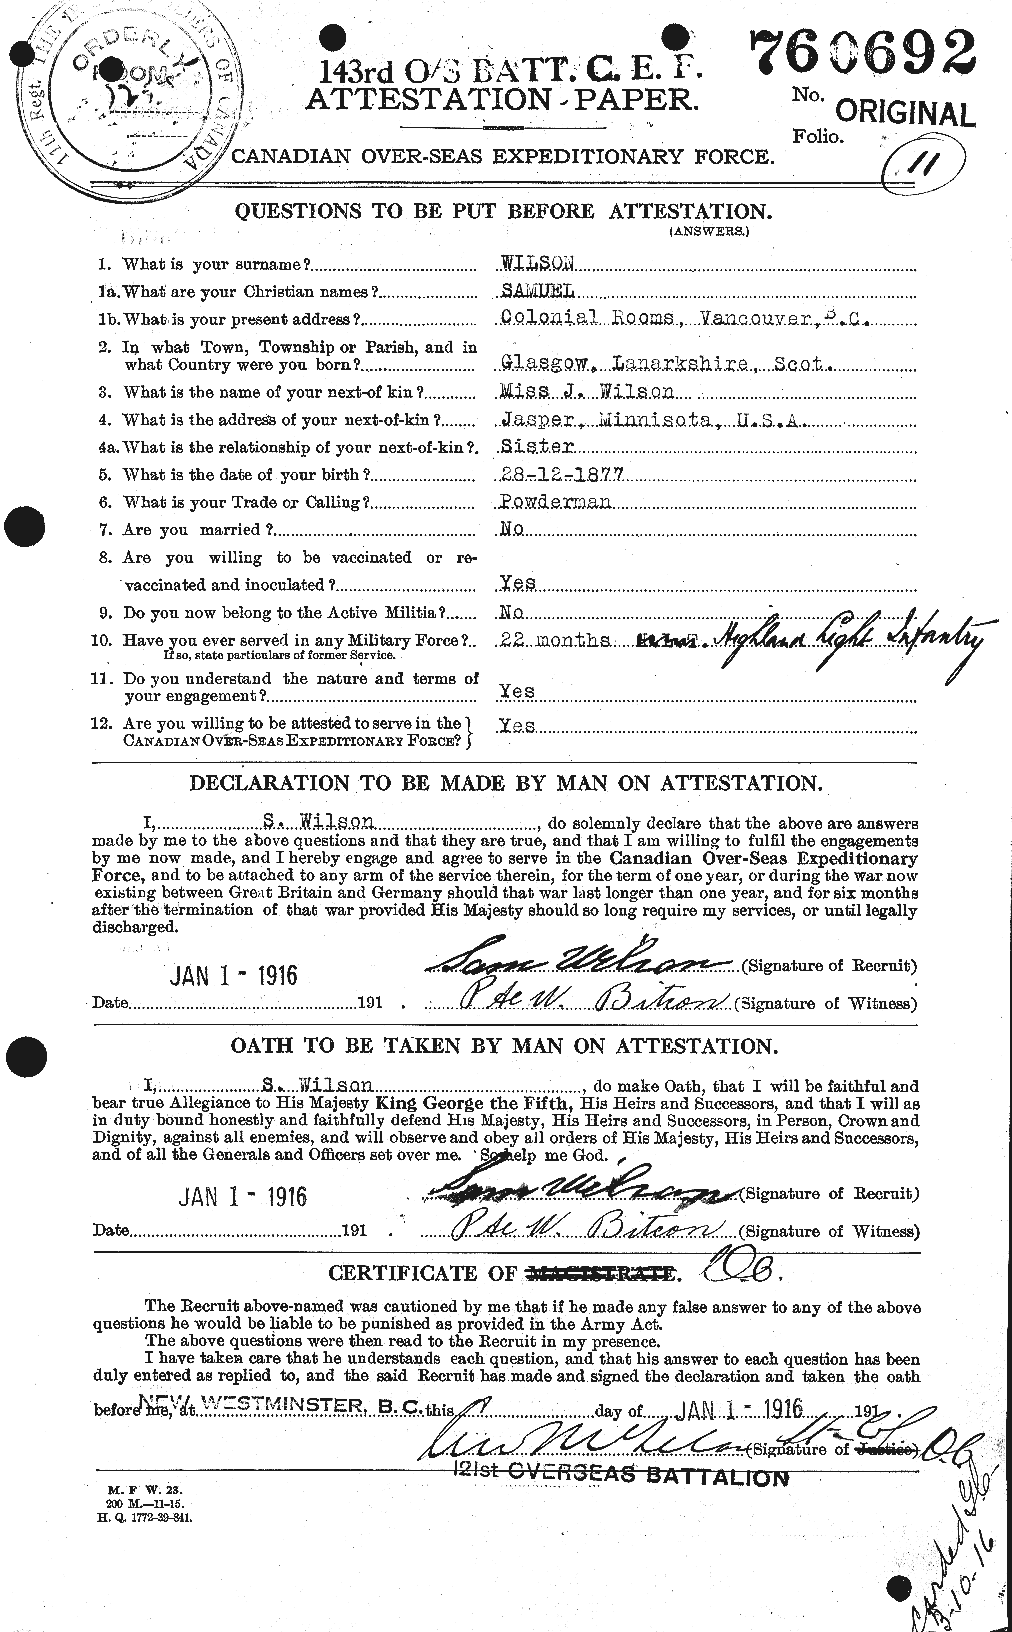 Personnel Records of the First World War - CEF 681097a